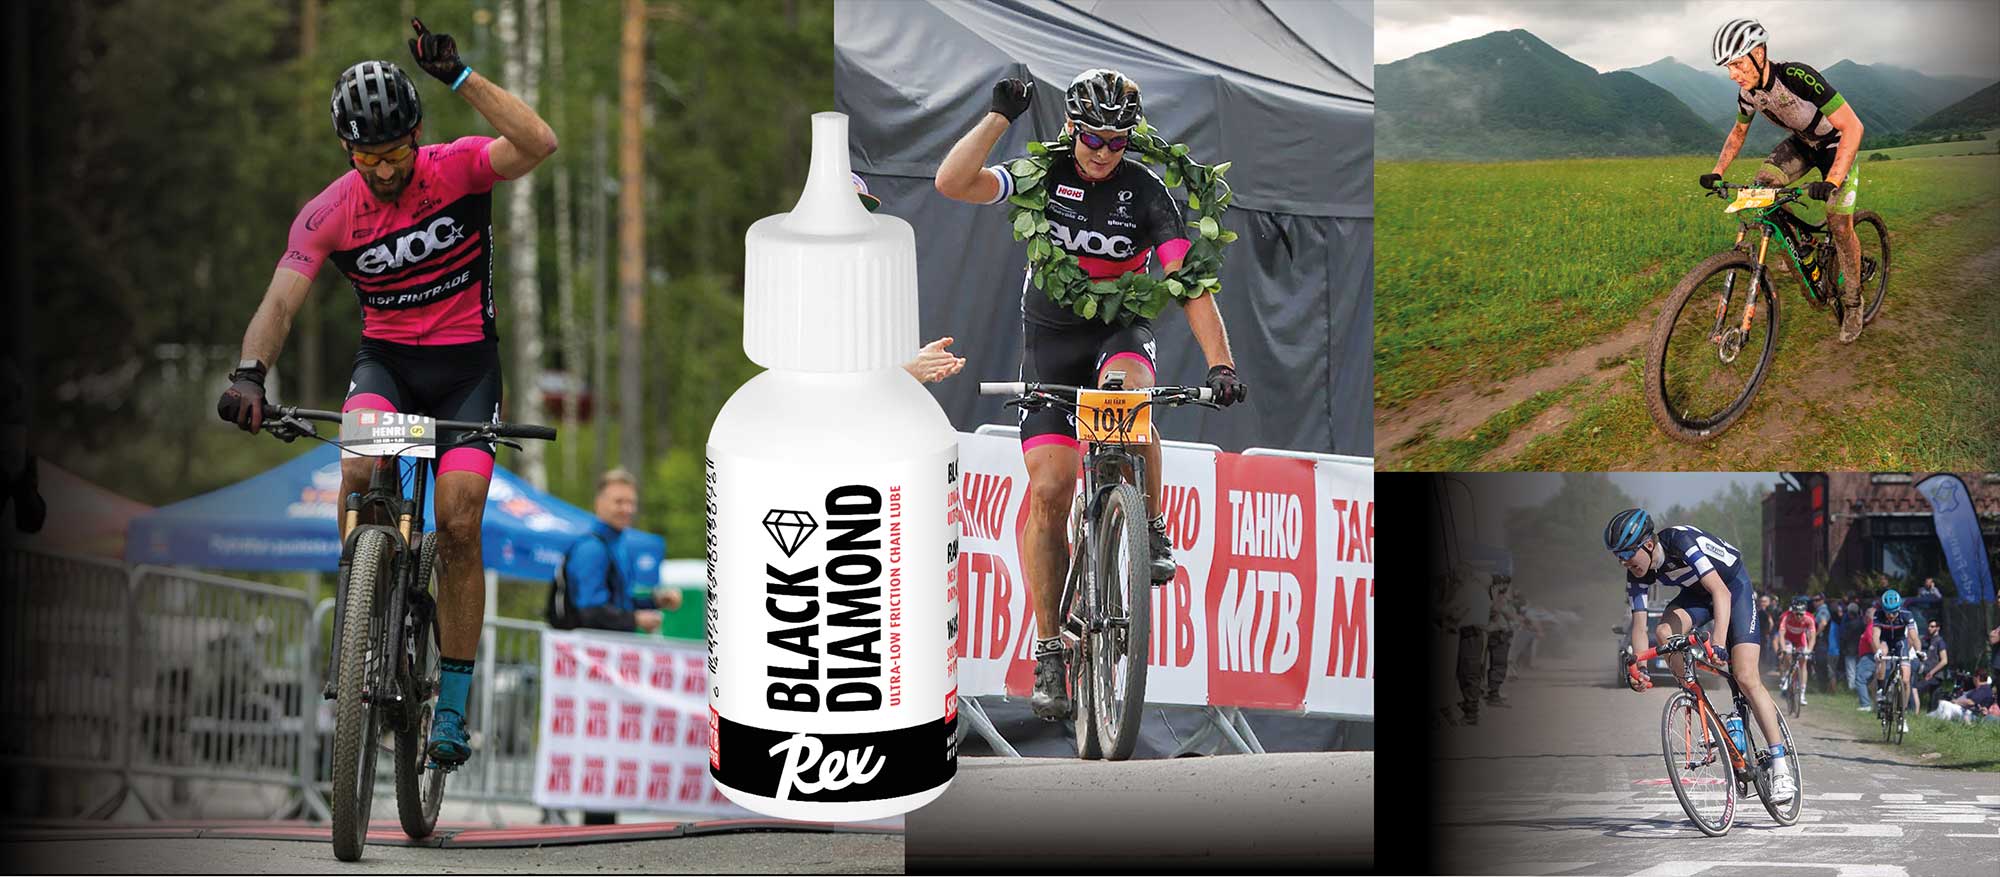 One of the fastest chain lubes ever - Rex Black Diamond